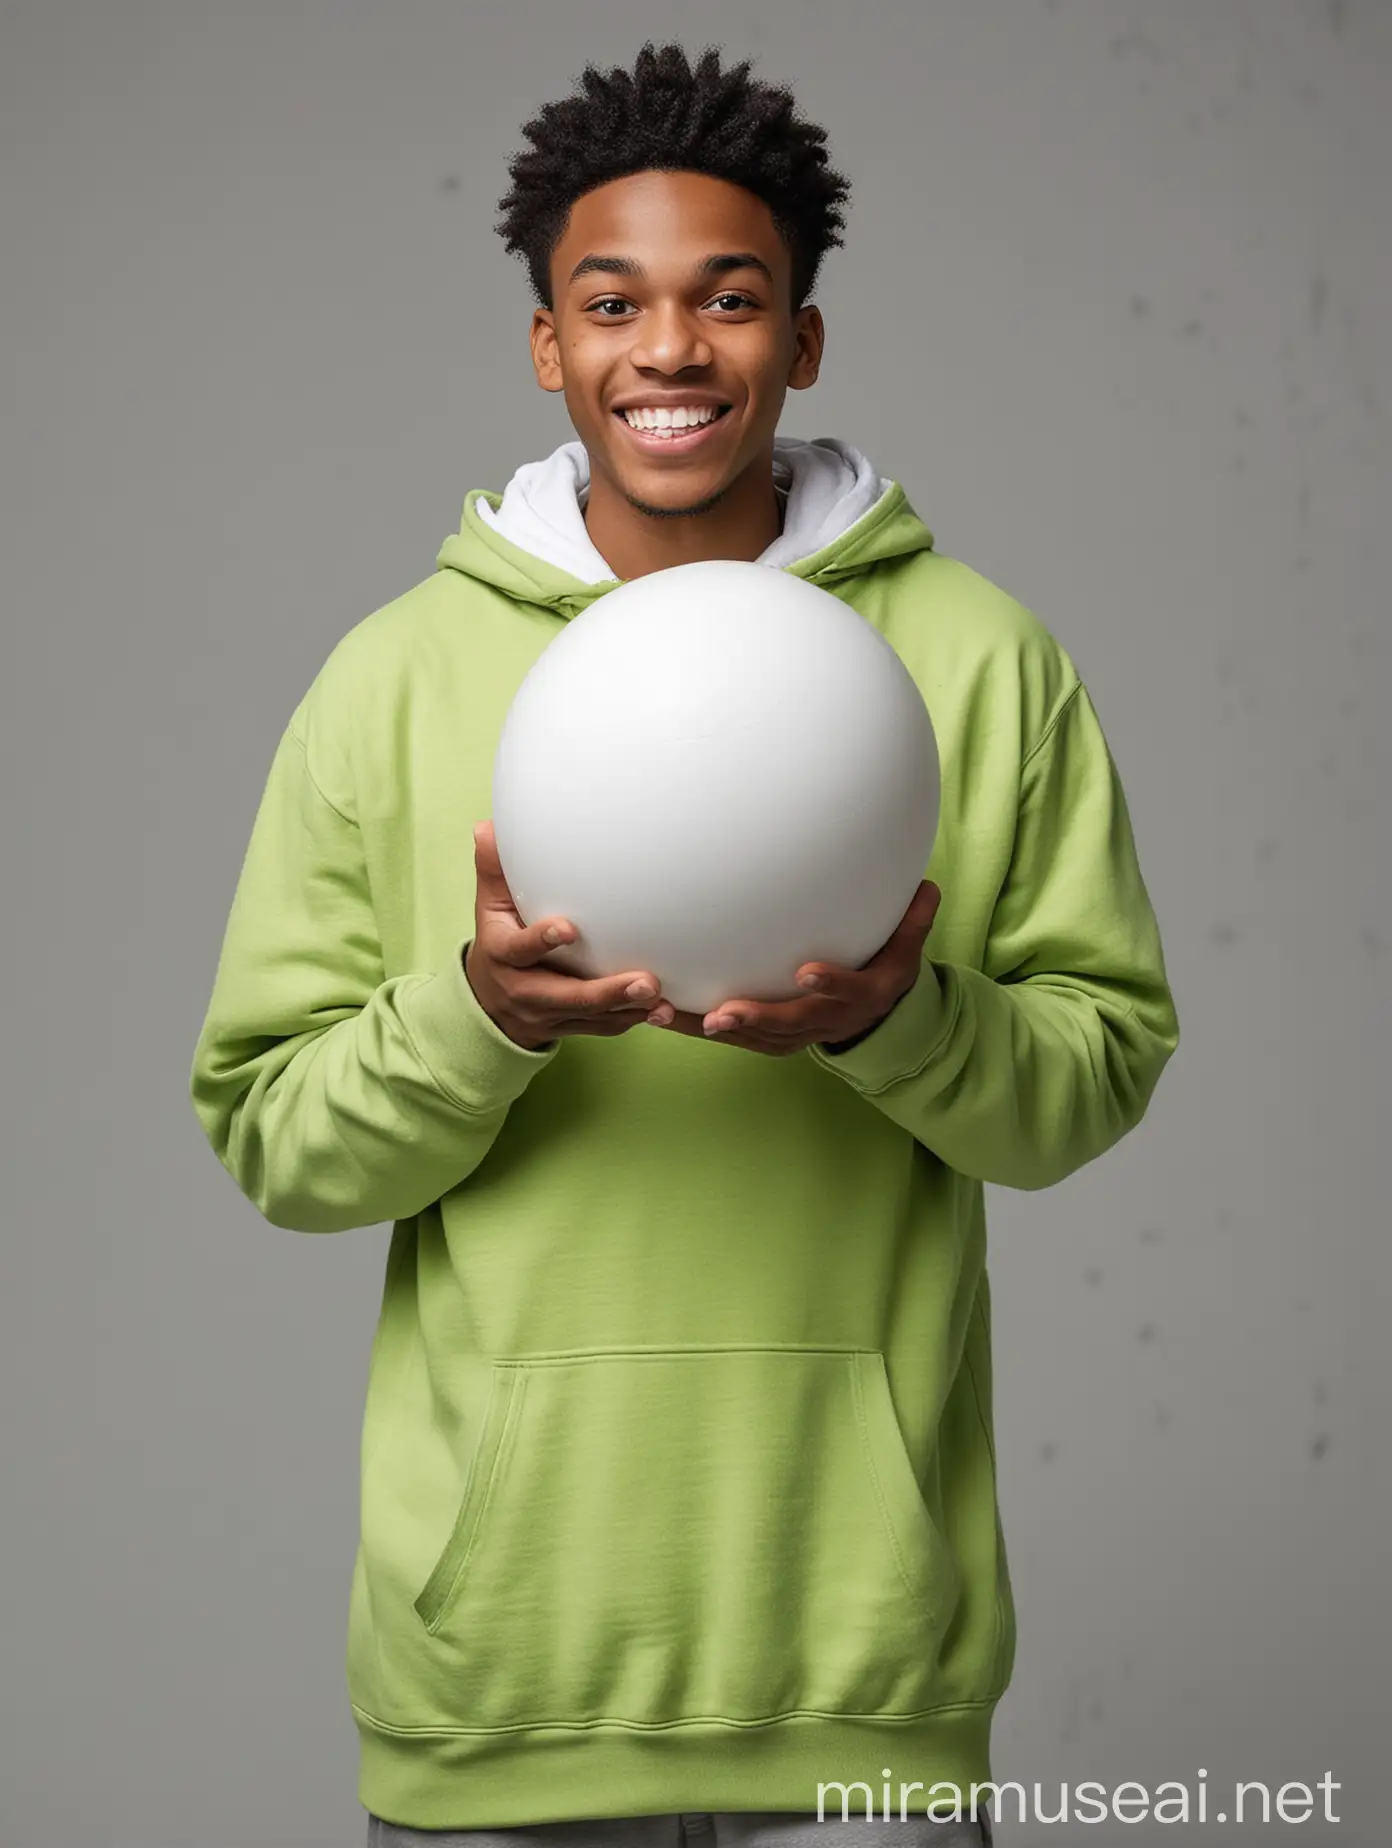 Cheerful African American Man in Lime Green Hoodie Holding Large White Ball